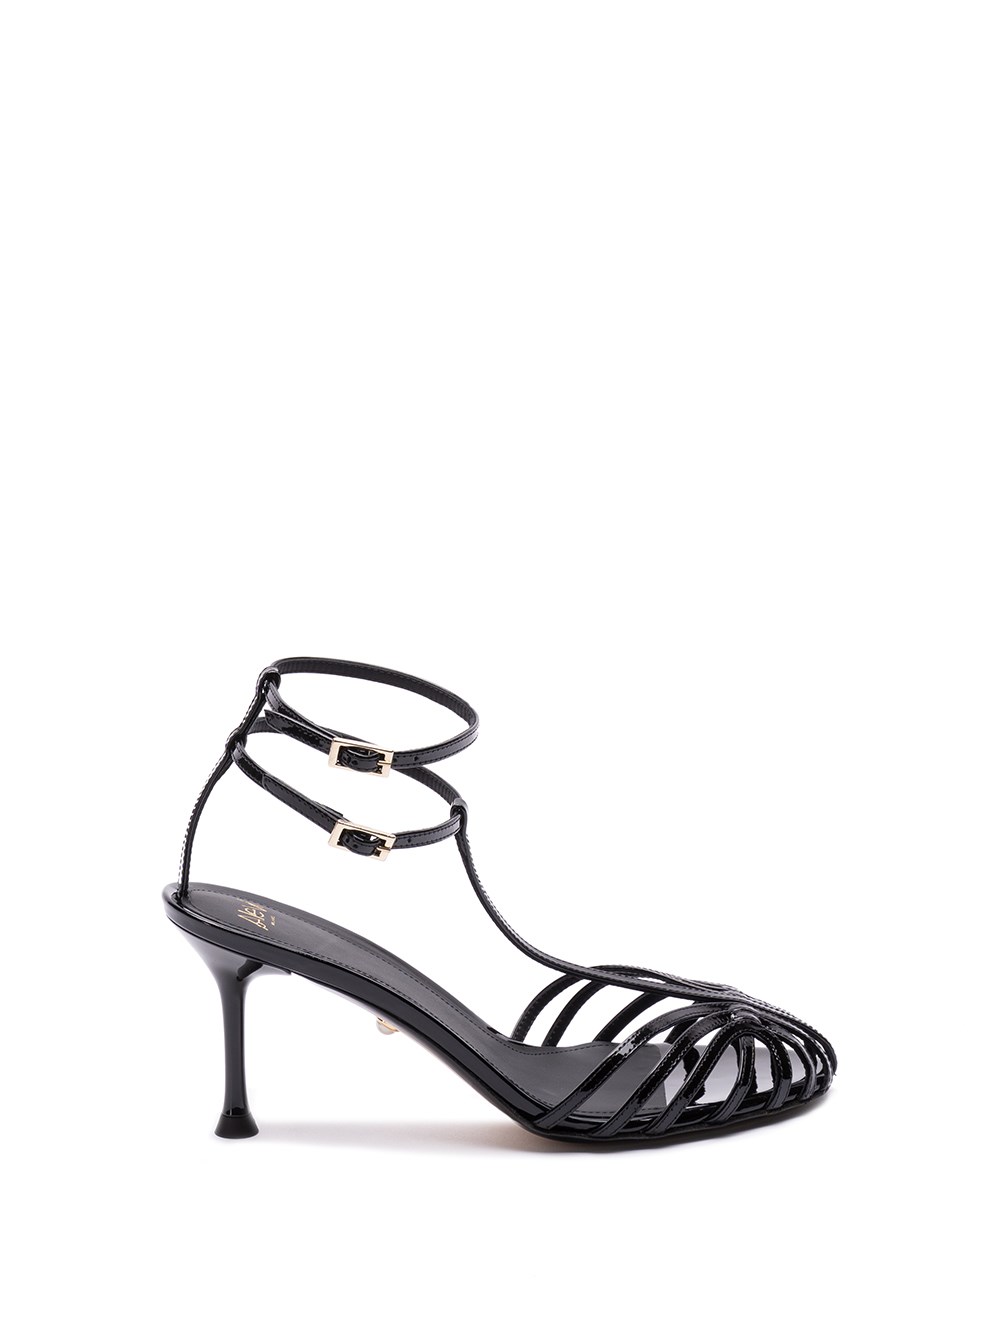 Alevì Milano Aleví Milano Woman Sandals Black Size 10 Leather In Black  